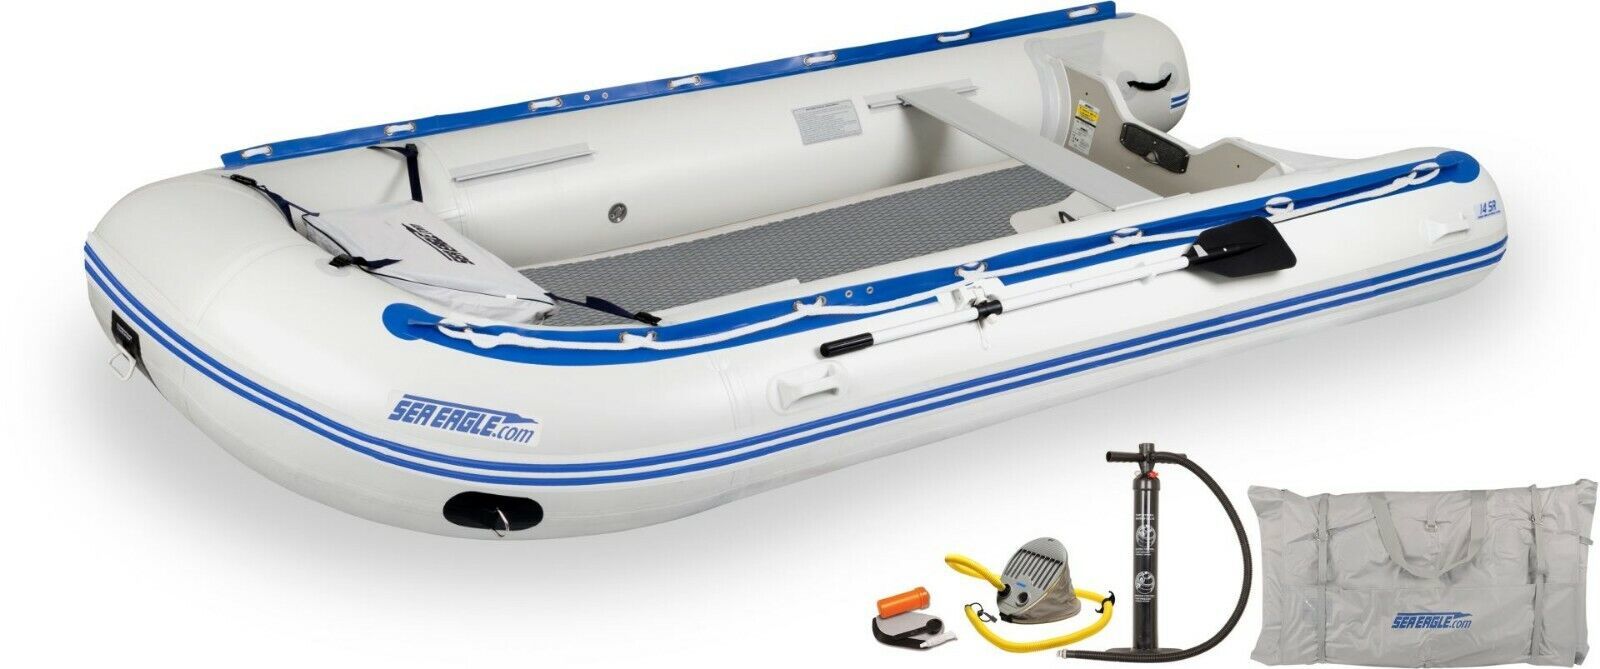 Primary image for Sea Eagle 14sr Drop Stitch Deluxe Pkg 14’ Inflatable Runabout Boat Dinghy Raft